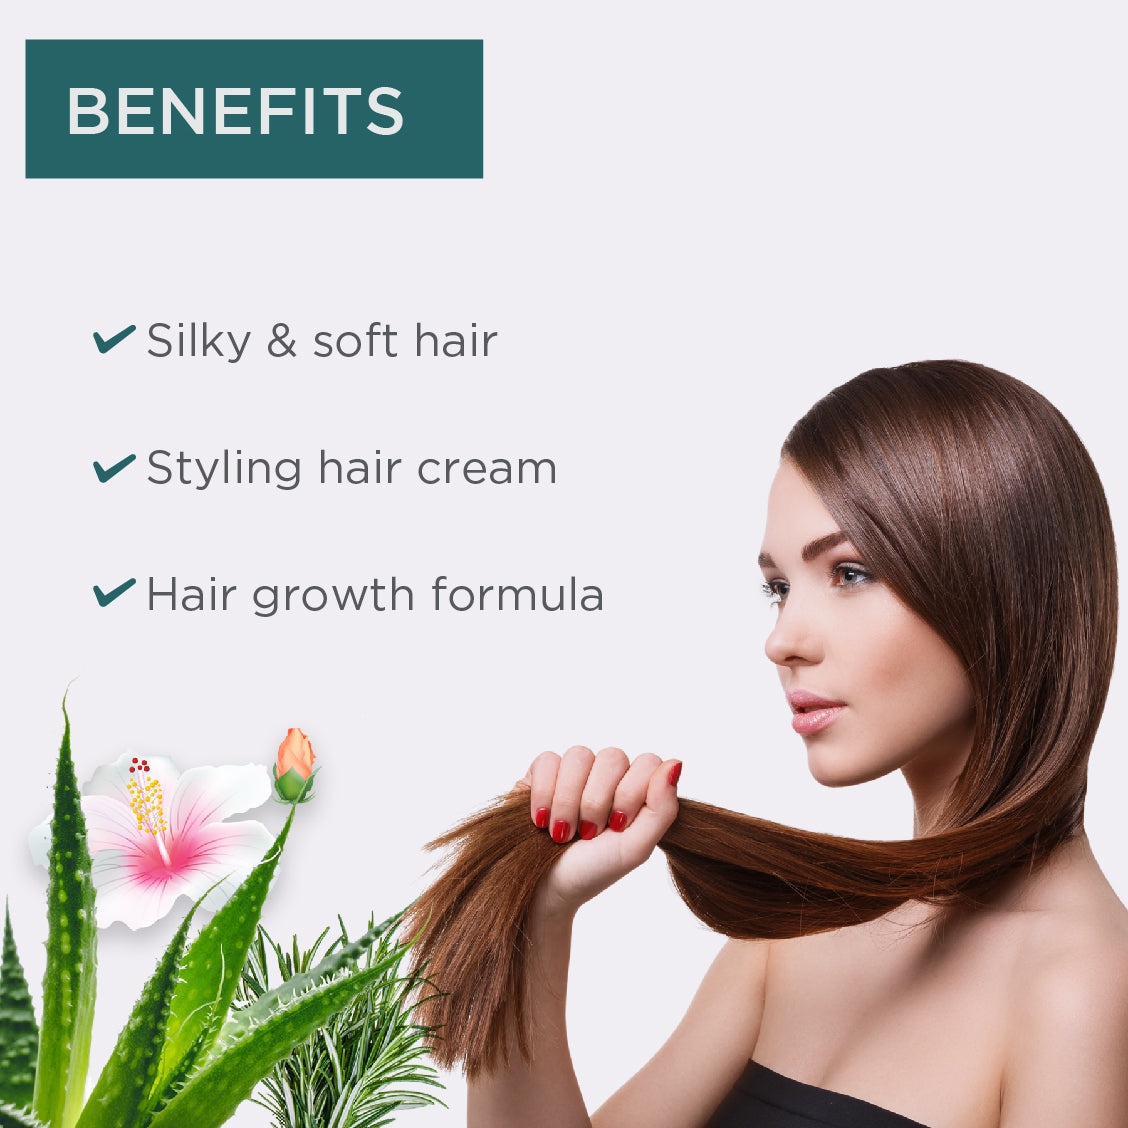 Leave In Hair Cream Benefits